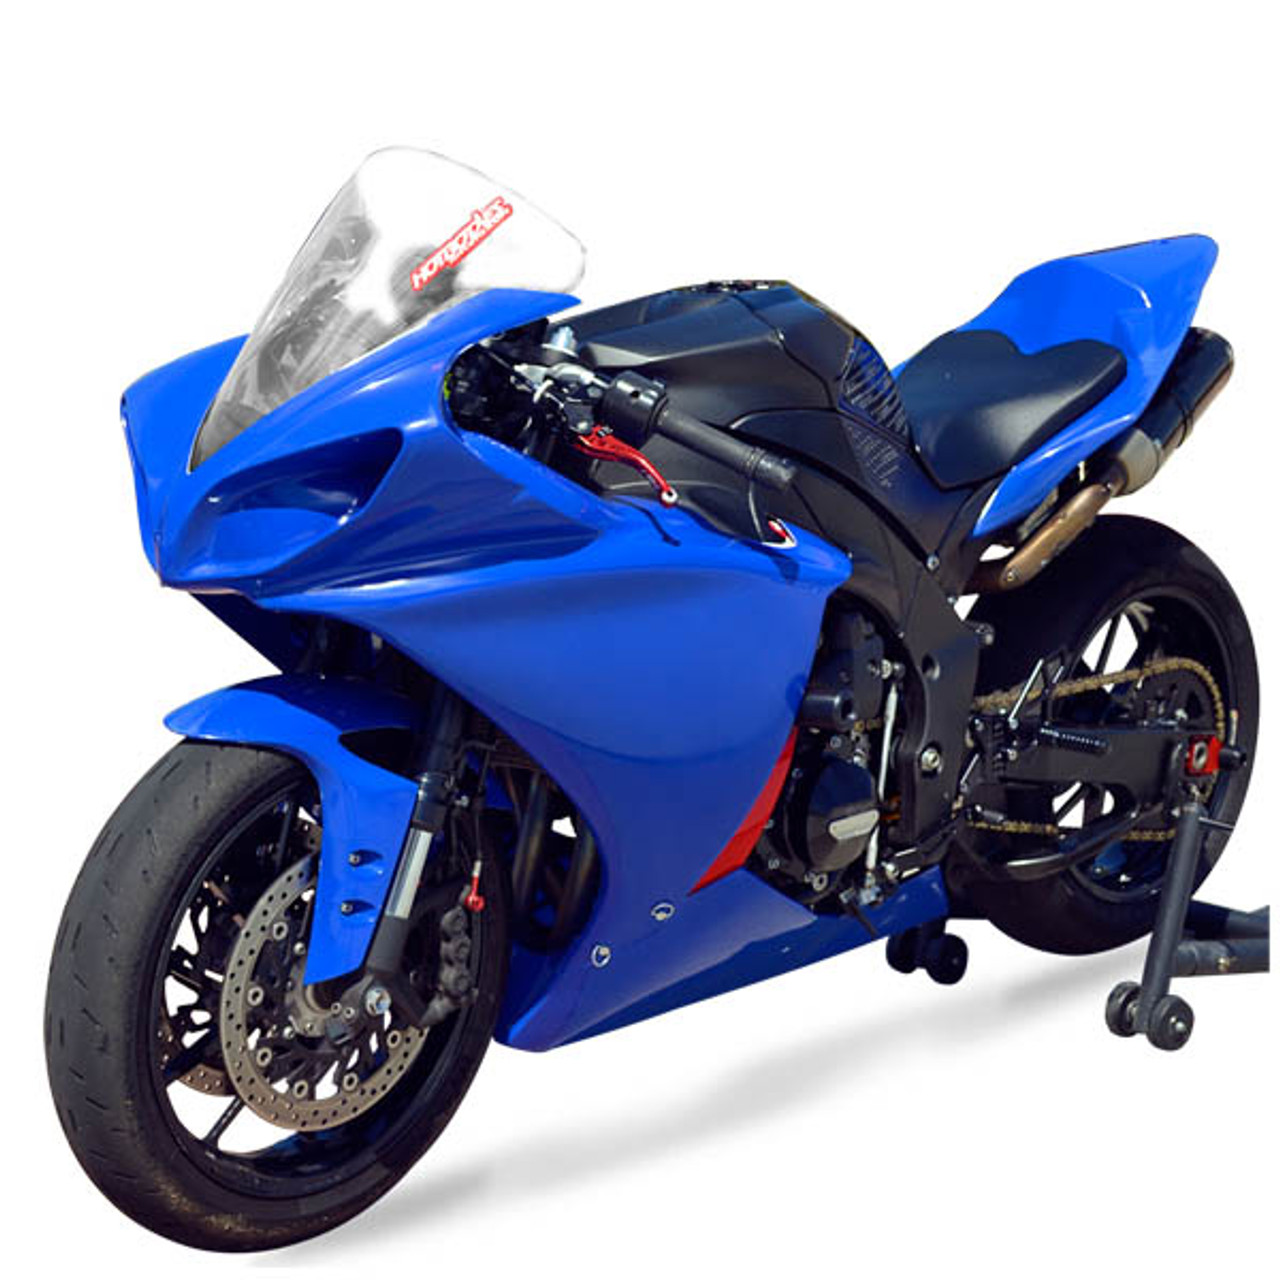 Front fairing's stickers - Yamaha R1 2009 / 2014